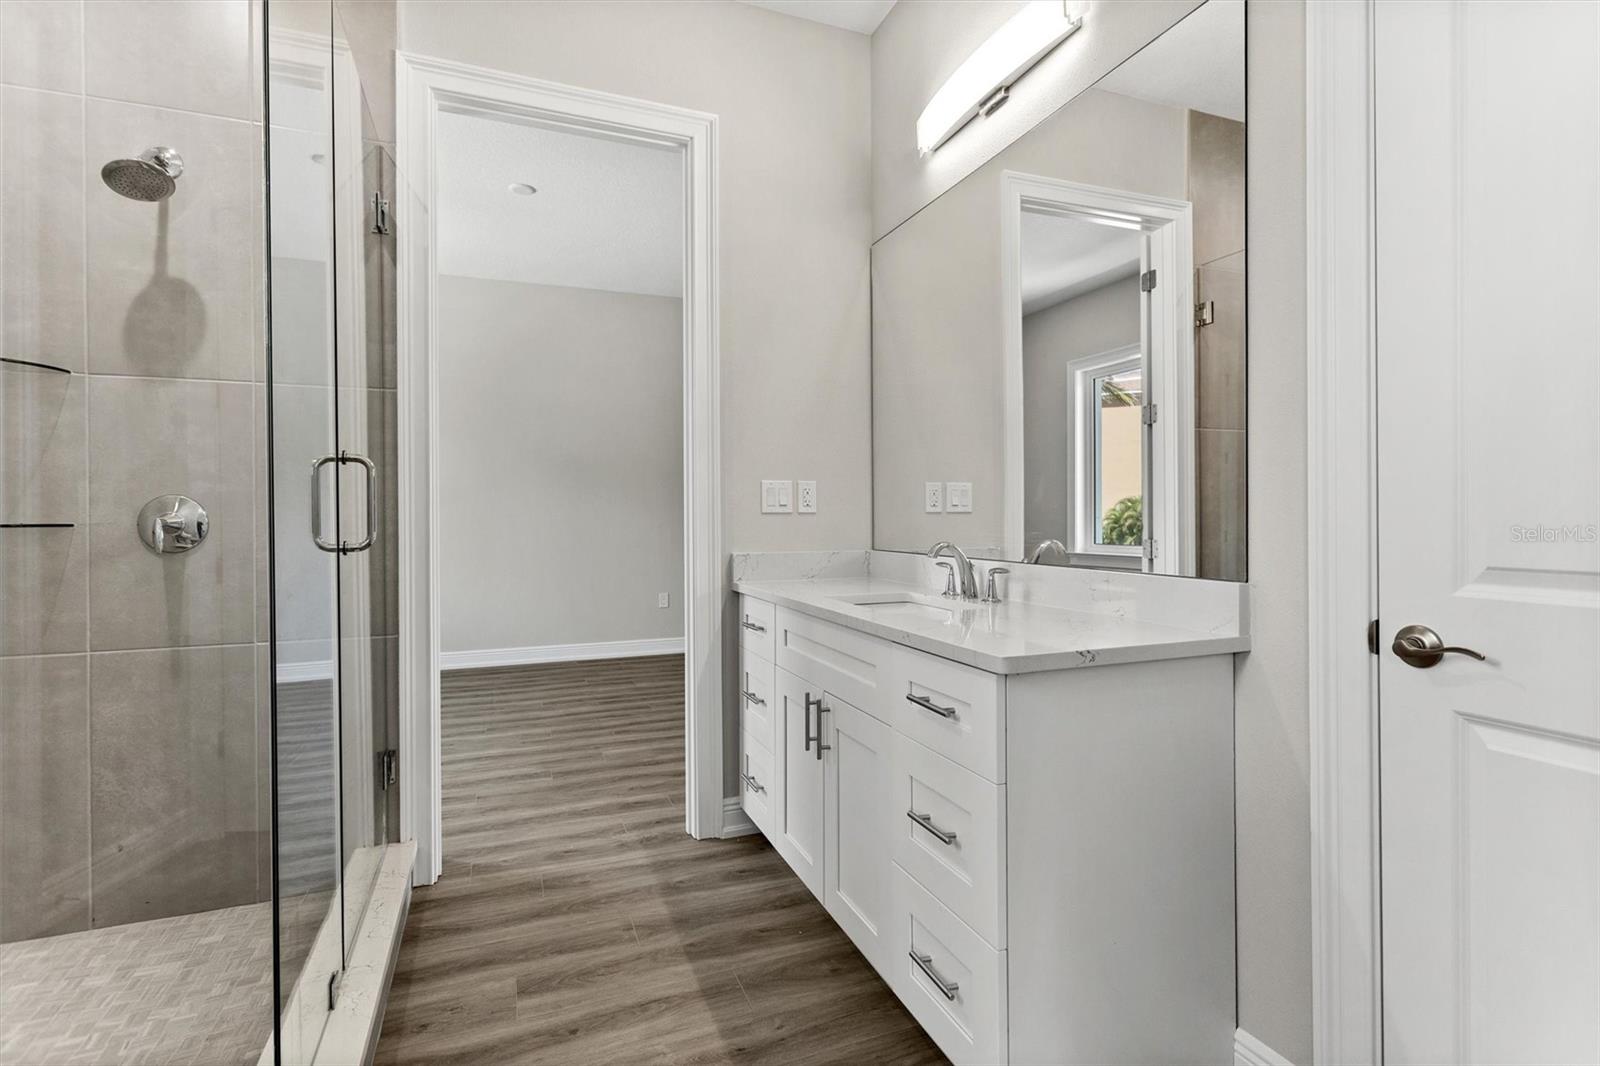 J&J Bath shared by Guest Bedroom #2 and #3, featuring a large shower, extra long vanity, and linen closet.